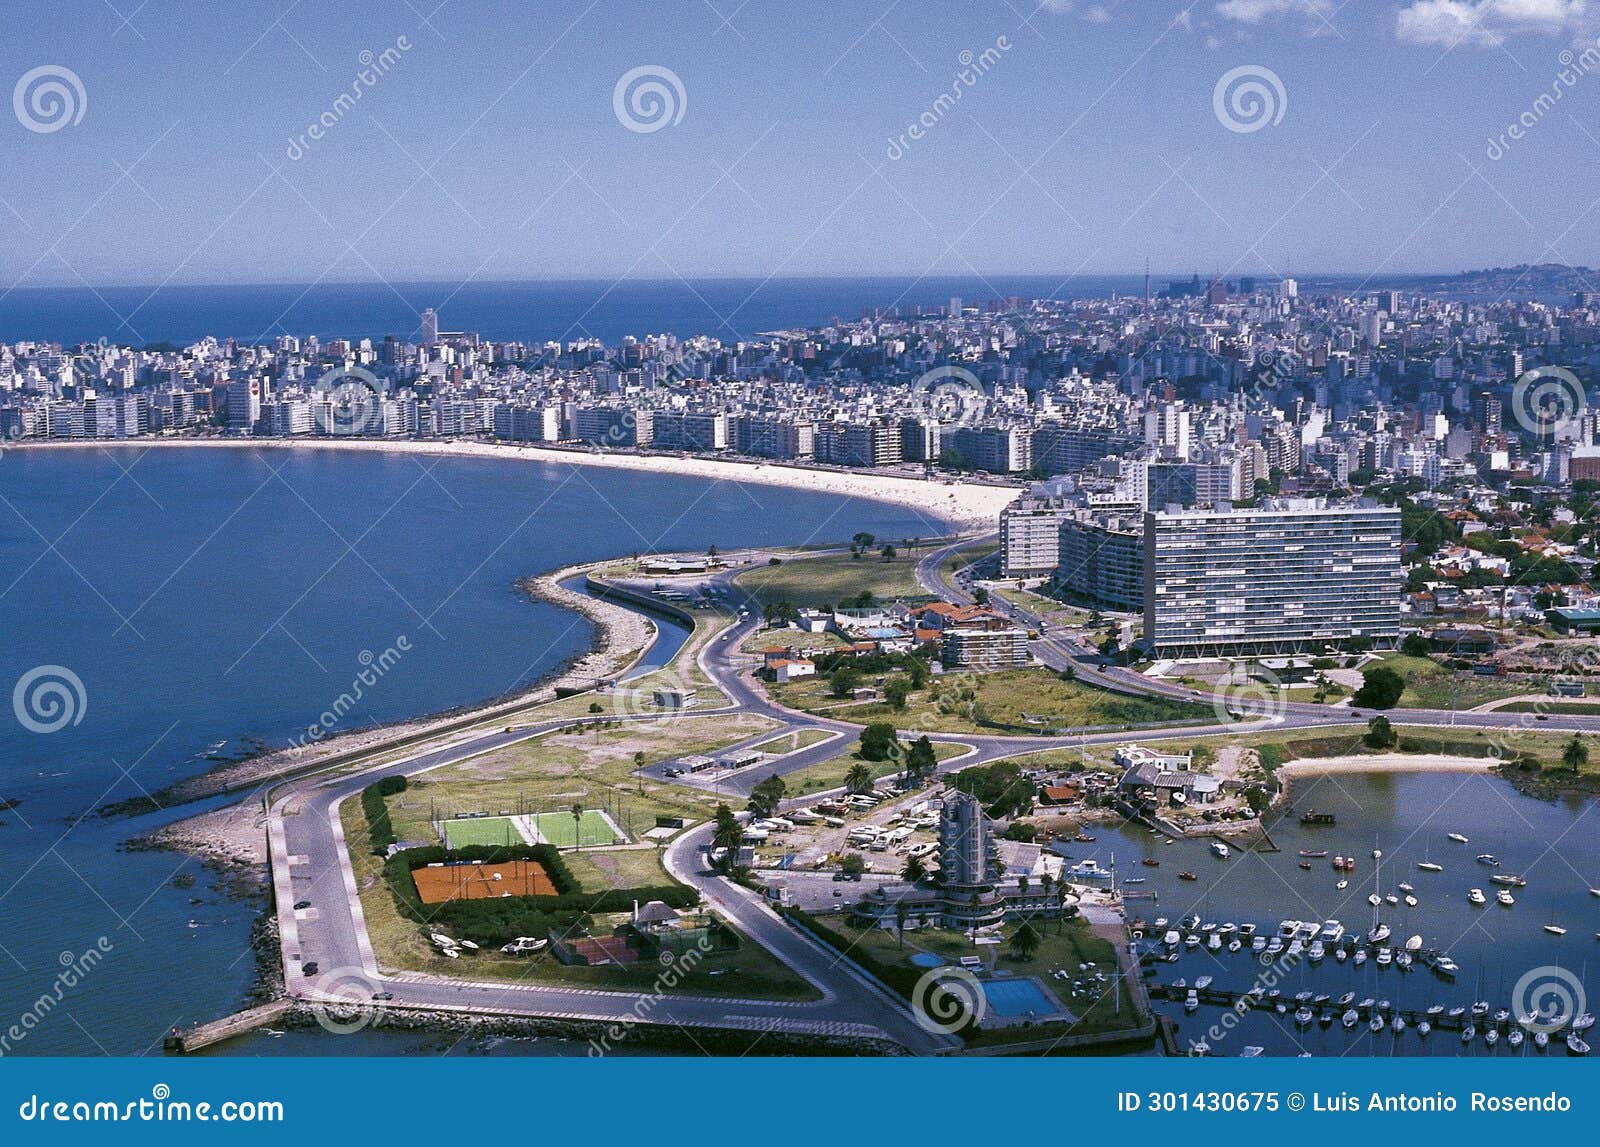 uruguay aerial view of the city of montevideo, the picturesque pocitos beach and the aresanal del-buceo port